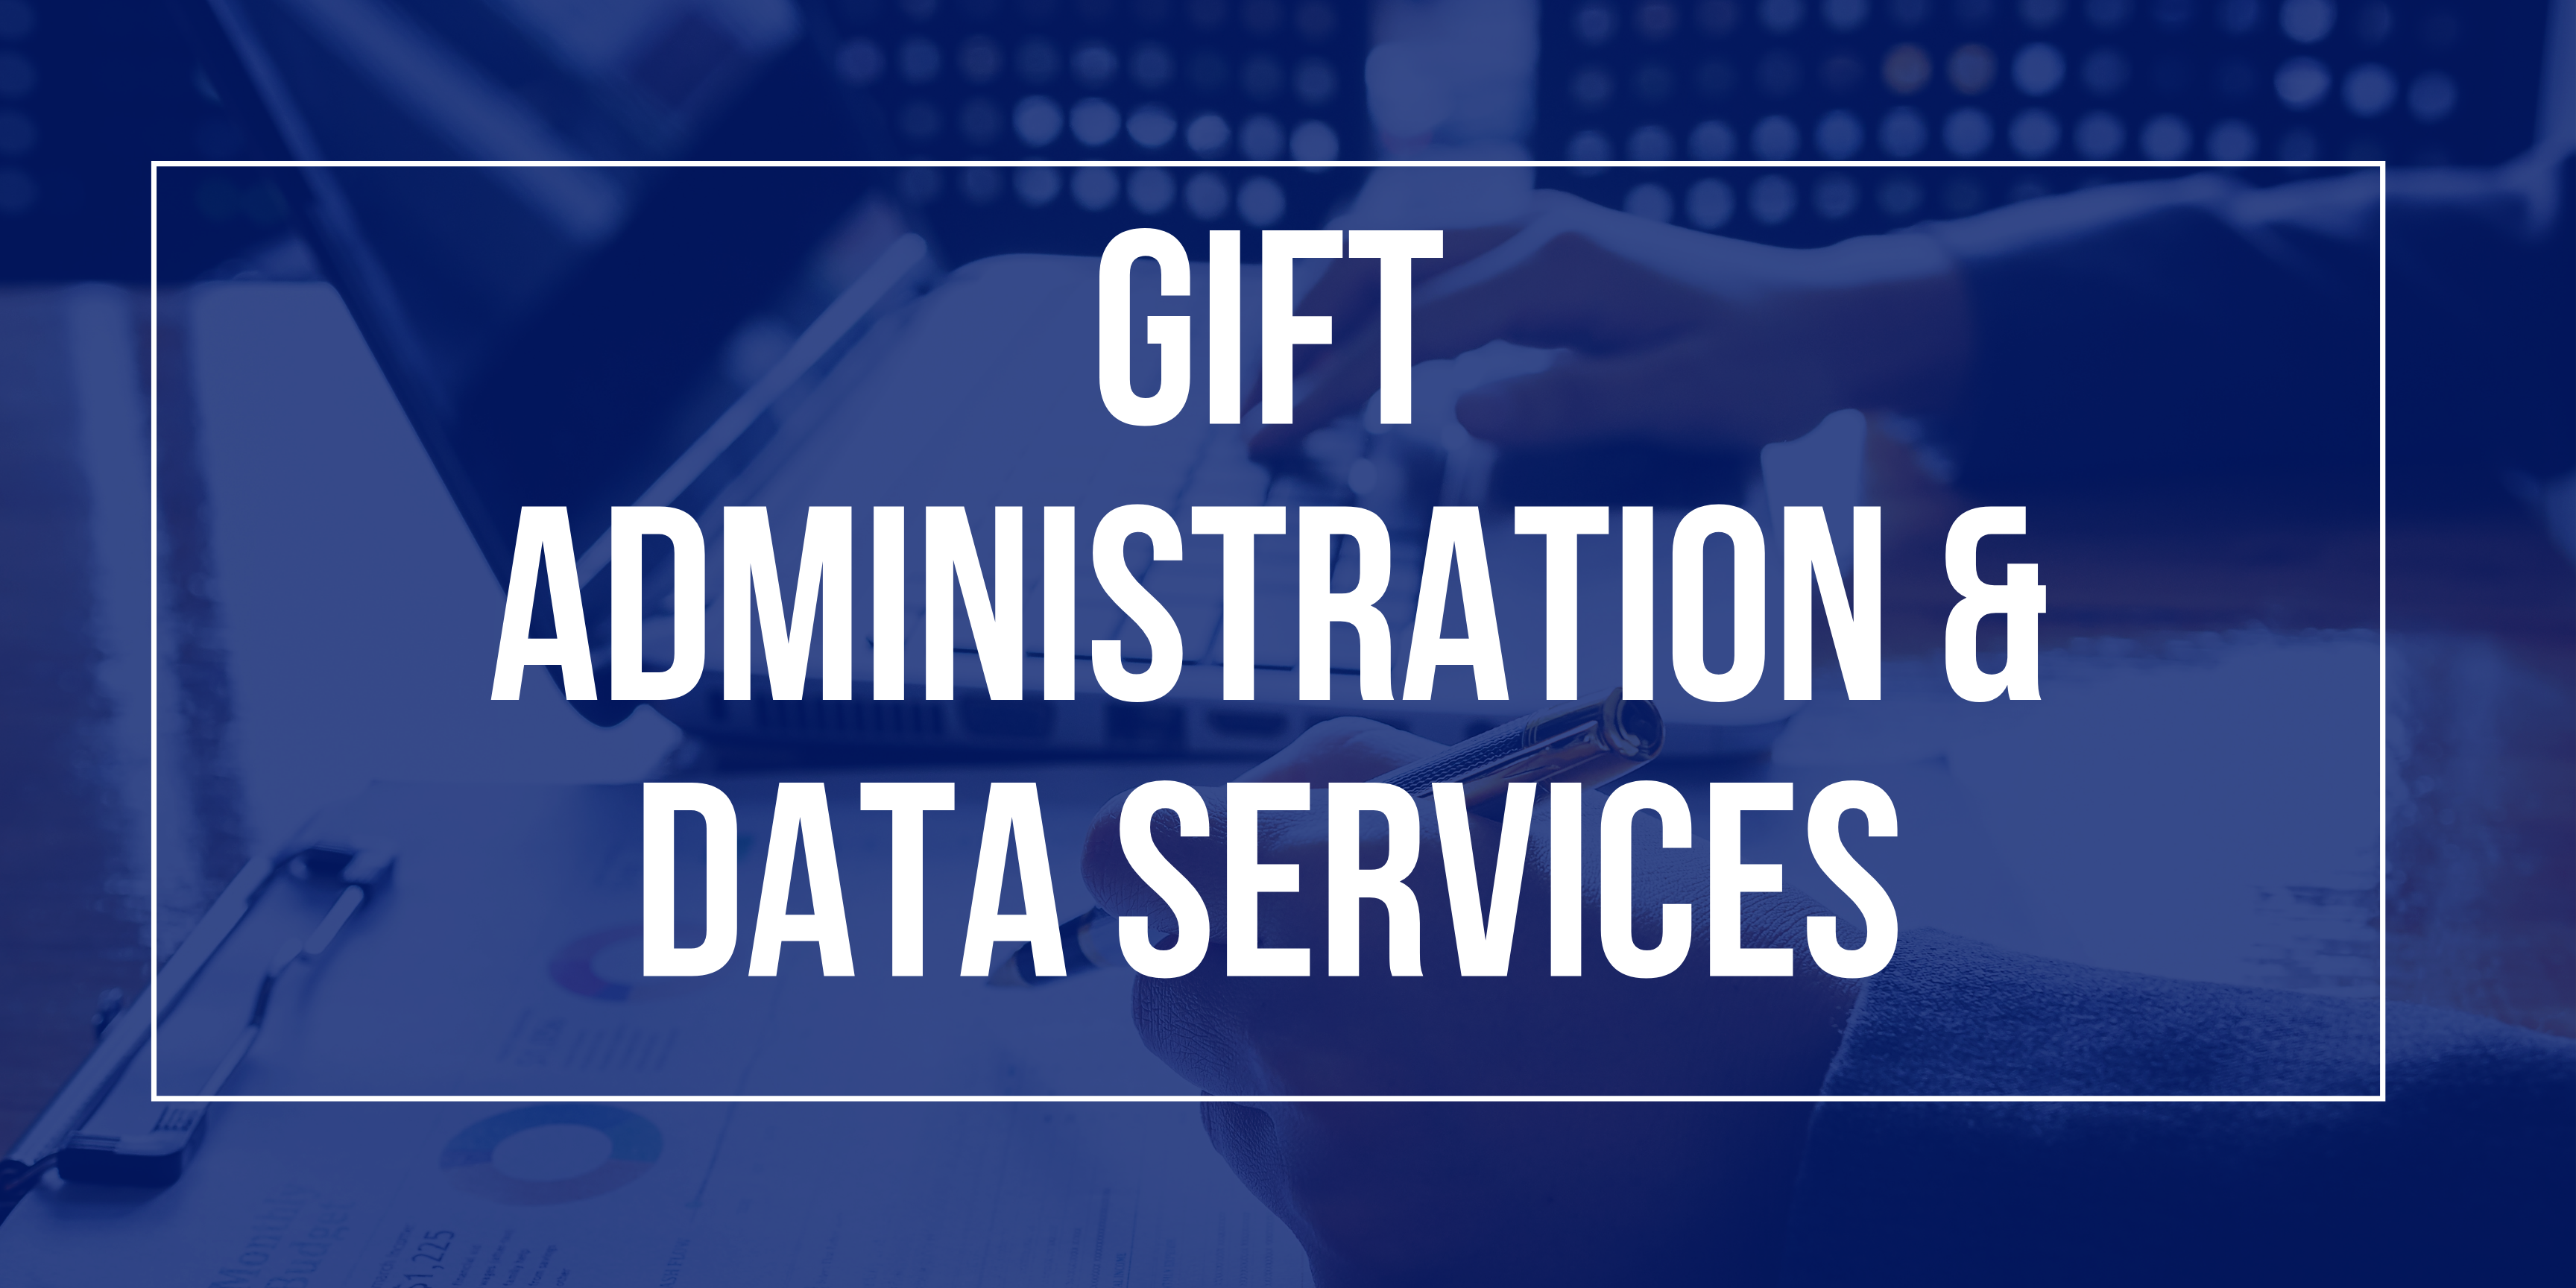 Gift Administration & Data Services